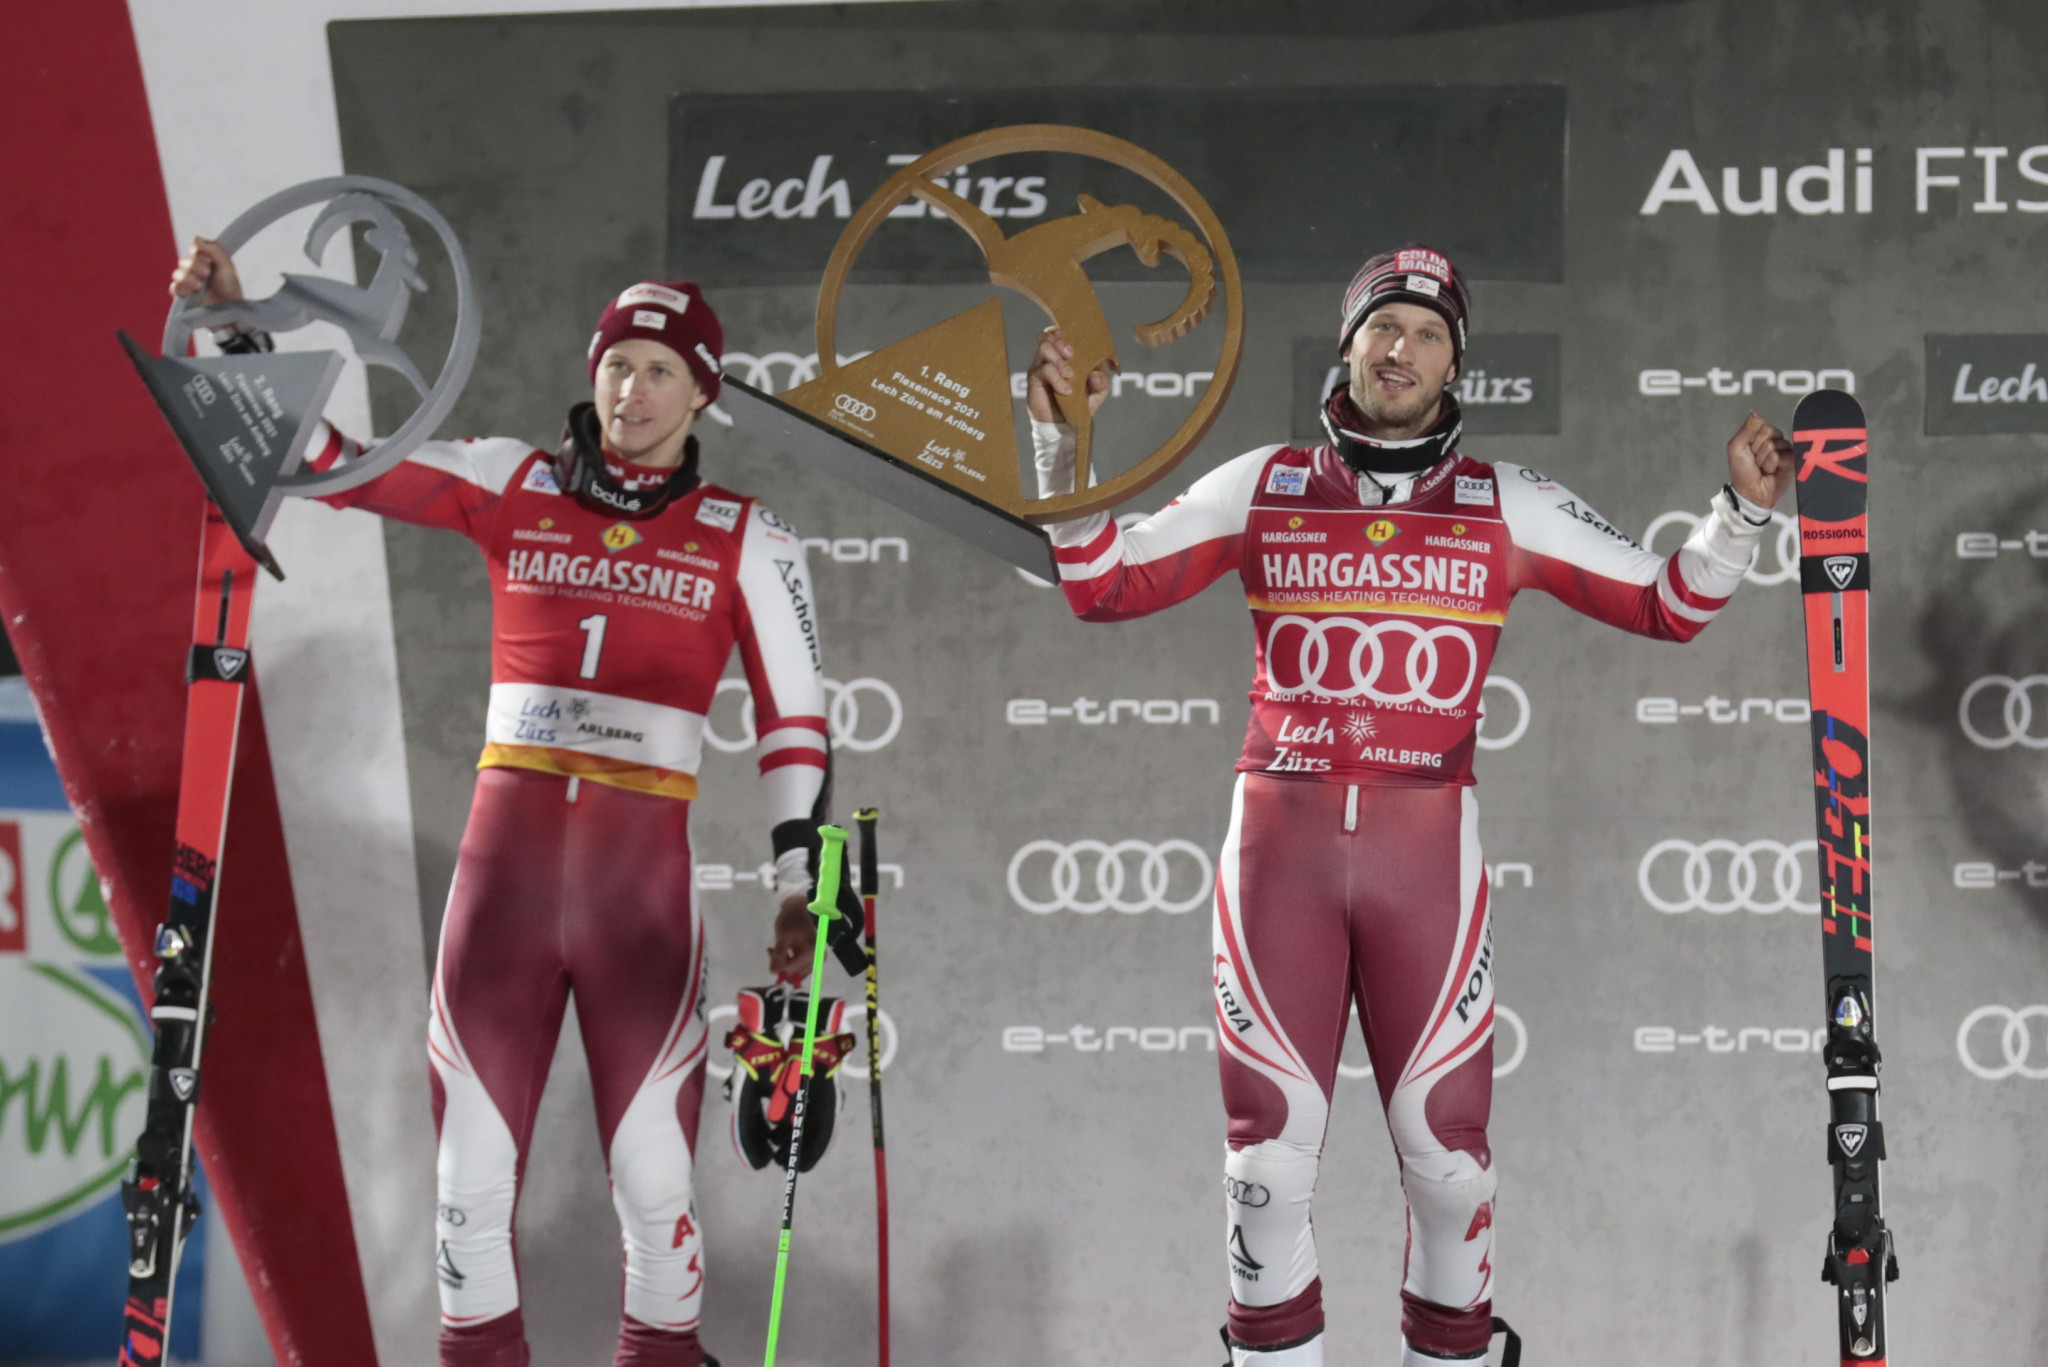 Dominik Raschner, left, on the podium with Christian Hirschbühl ©Getty Images